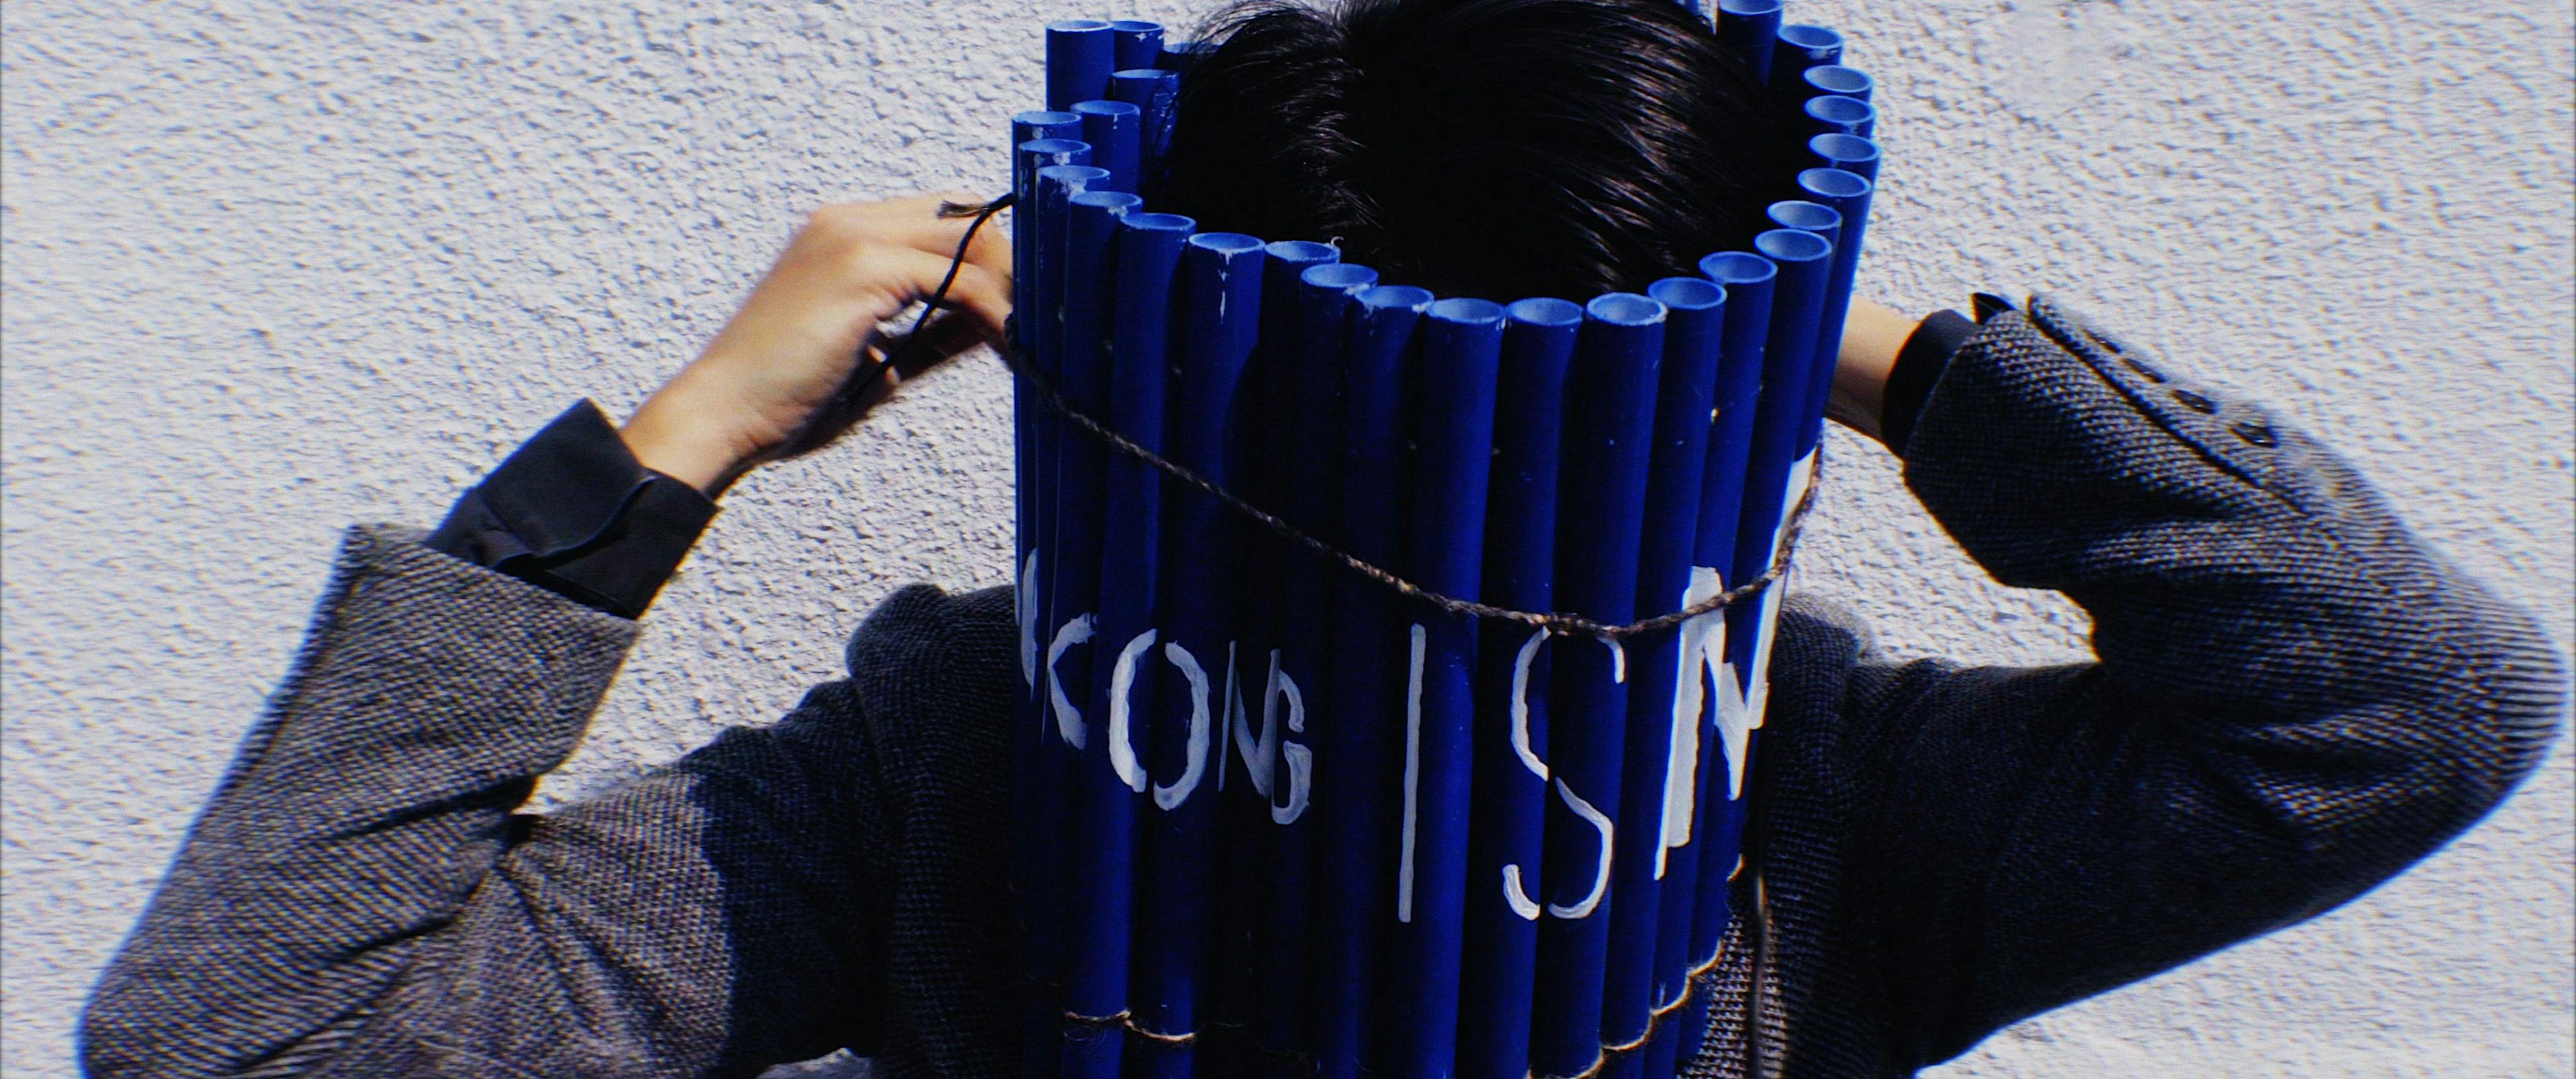 Image of a person tying lots of lengths of blue tubing around their face with some lettering on it. They are wearing a grey blazer.